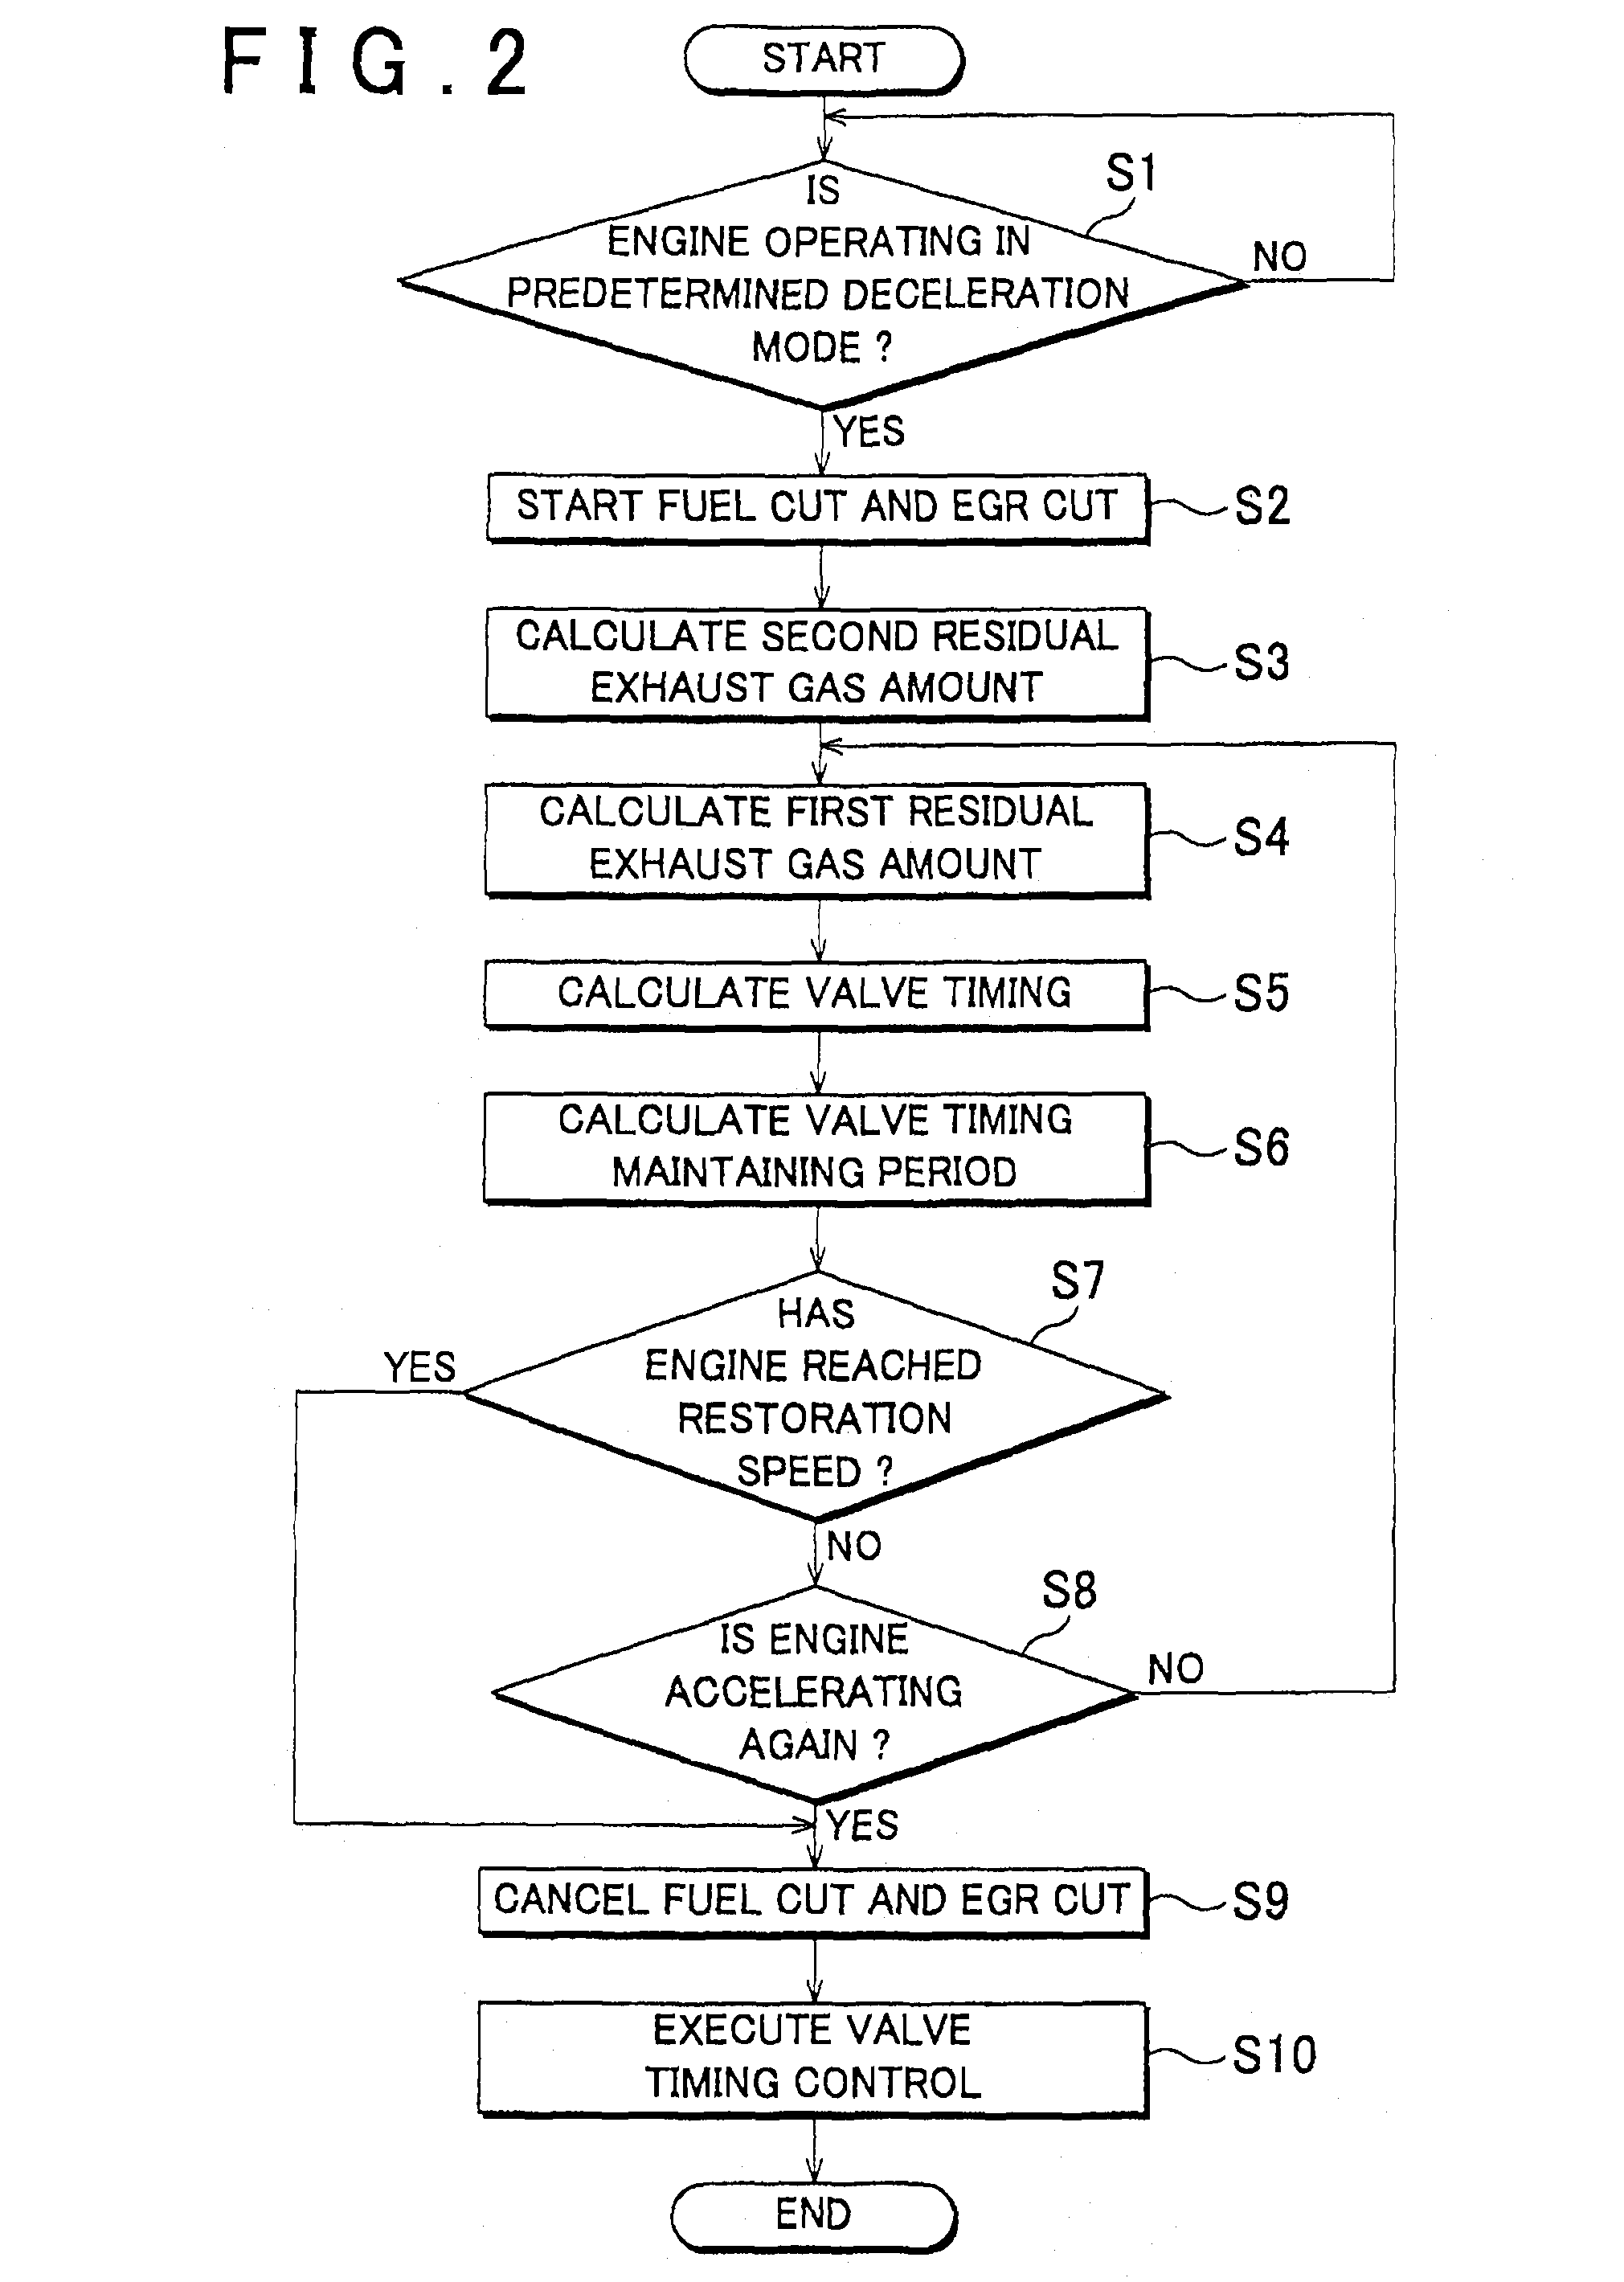 Internal combustion engine control apparatus and method